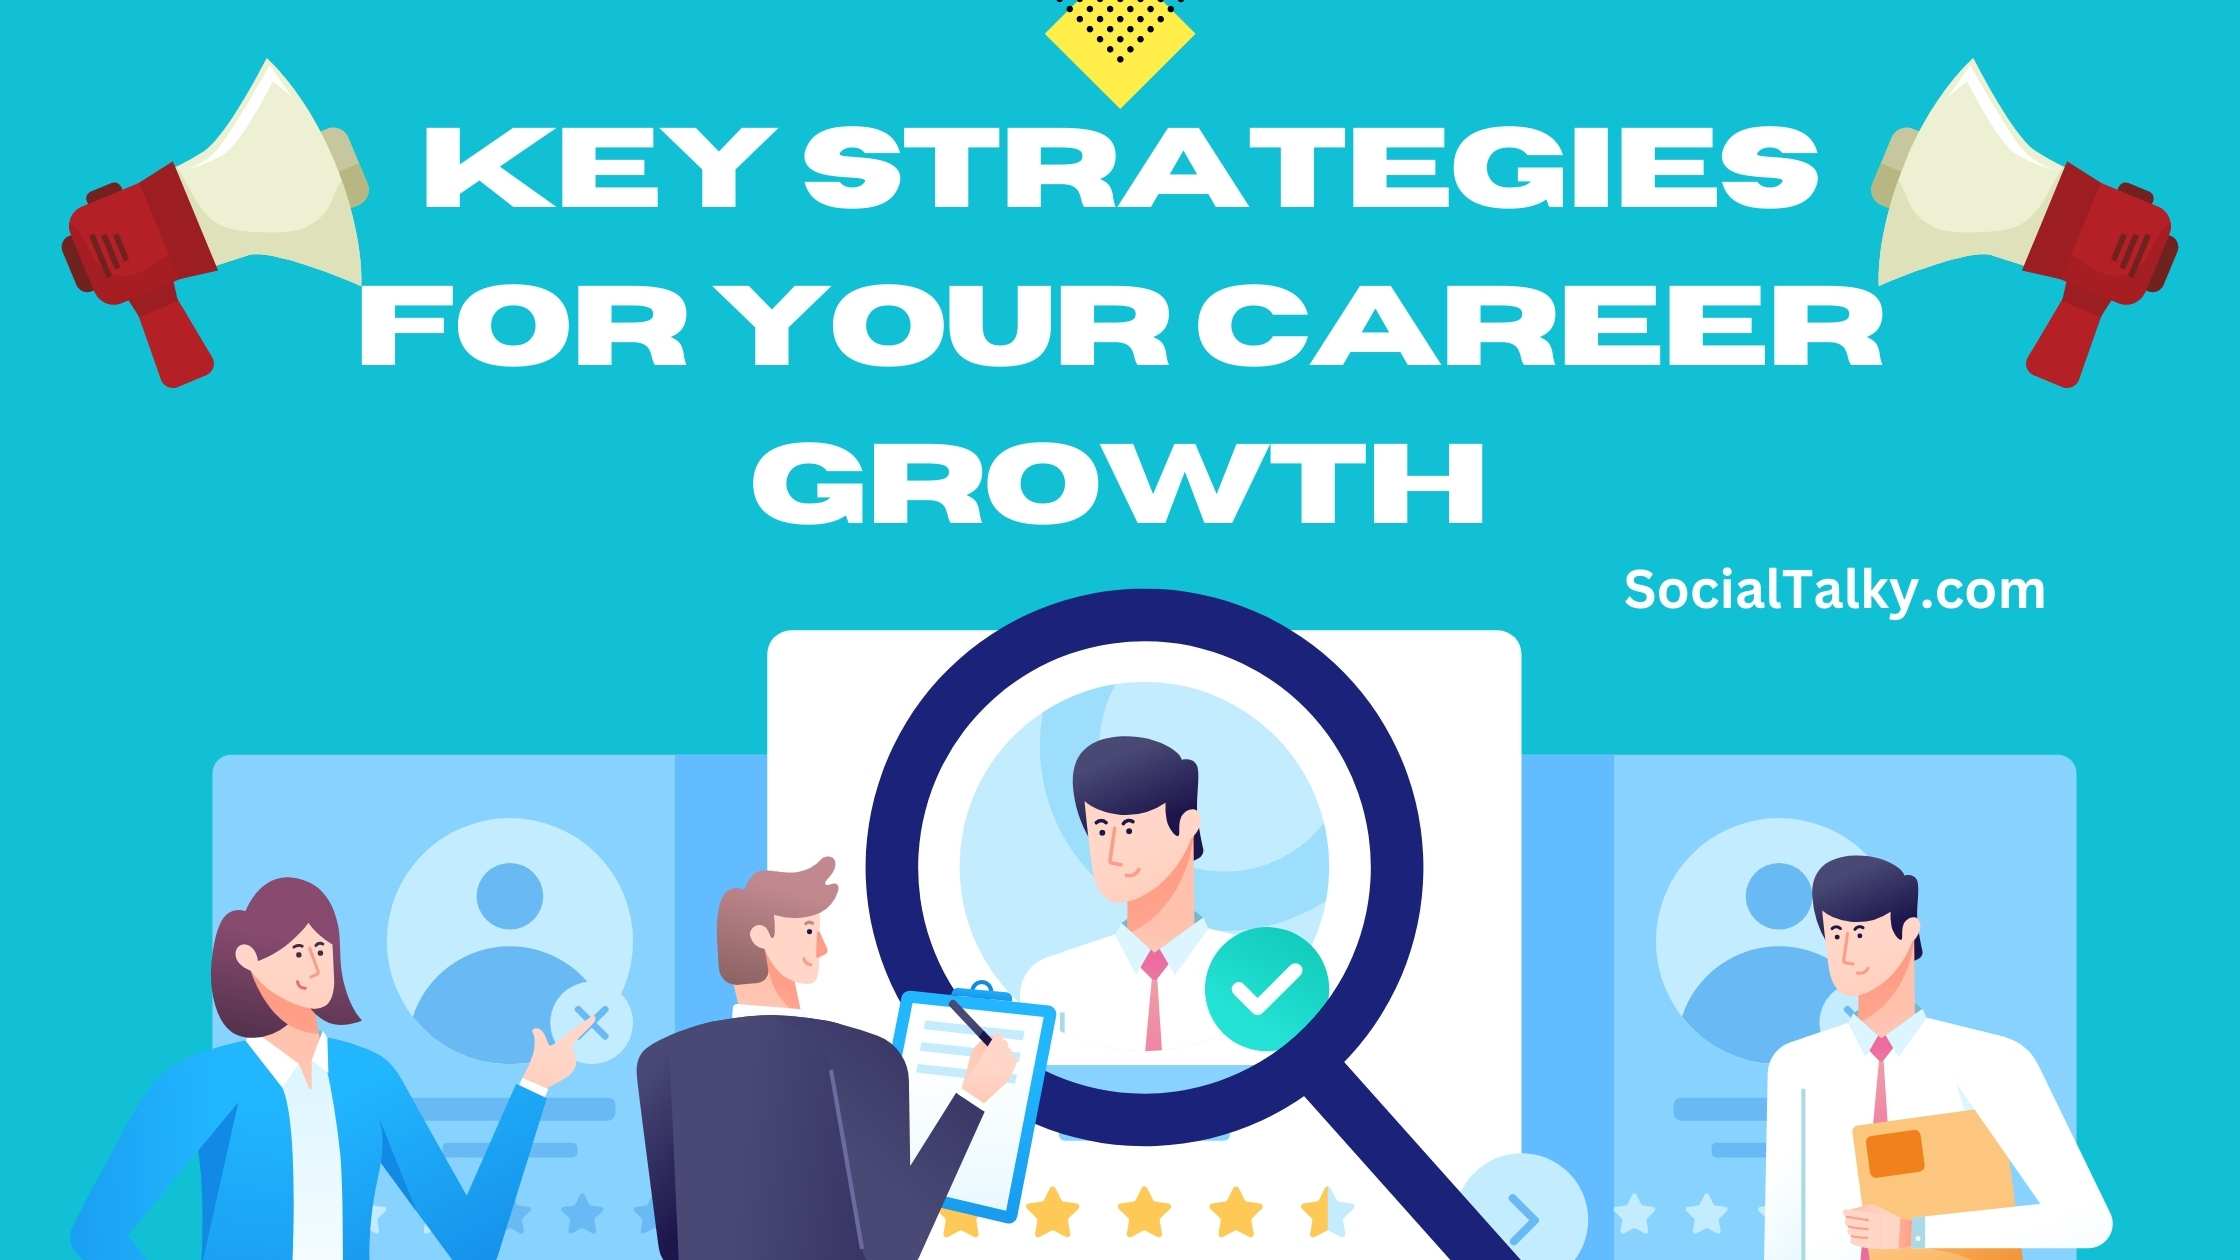 Key Strategies for Your Career Growth